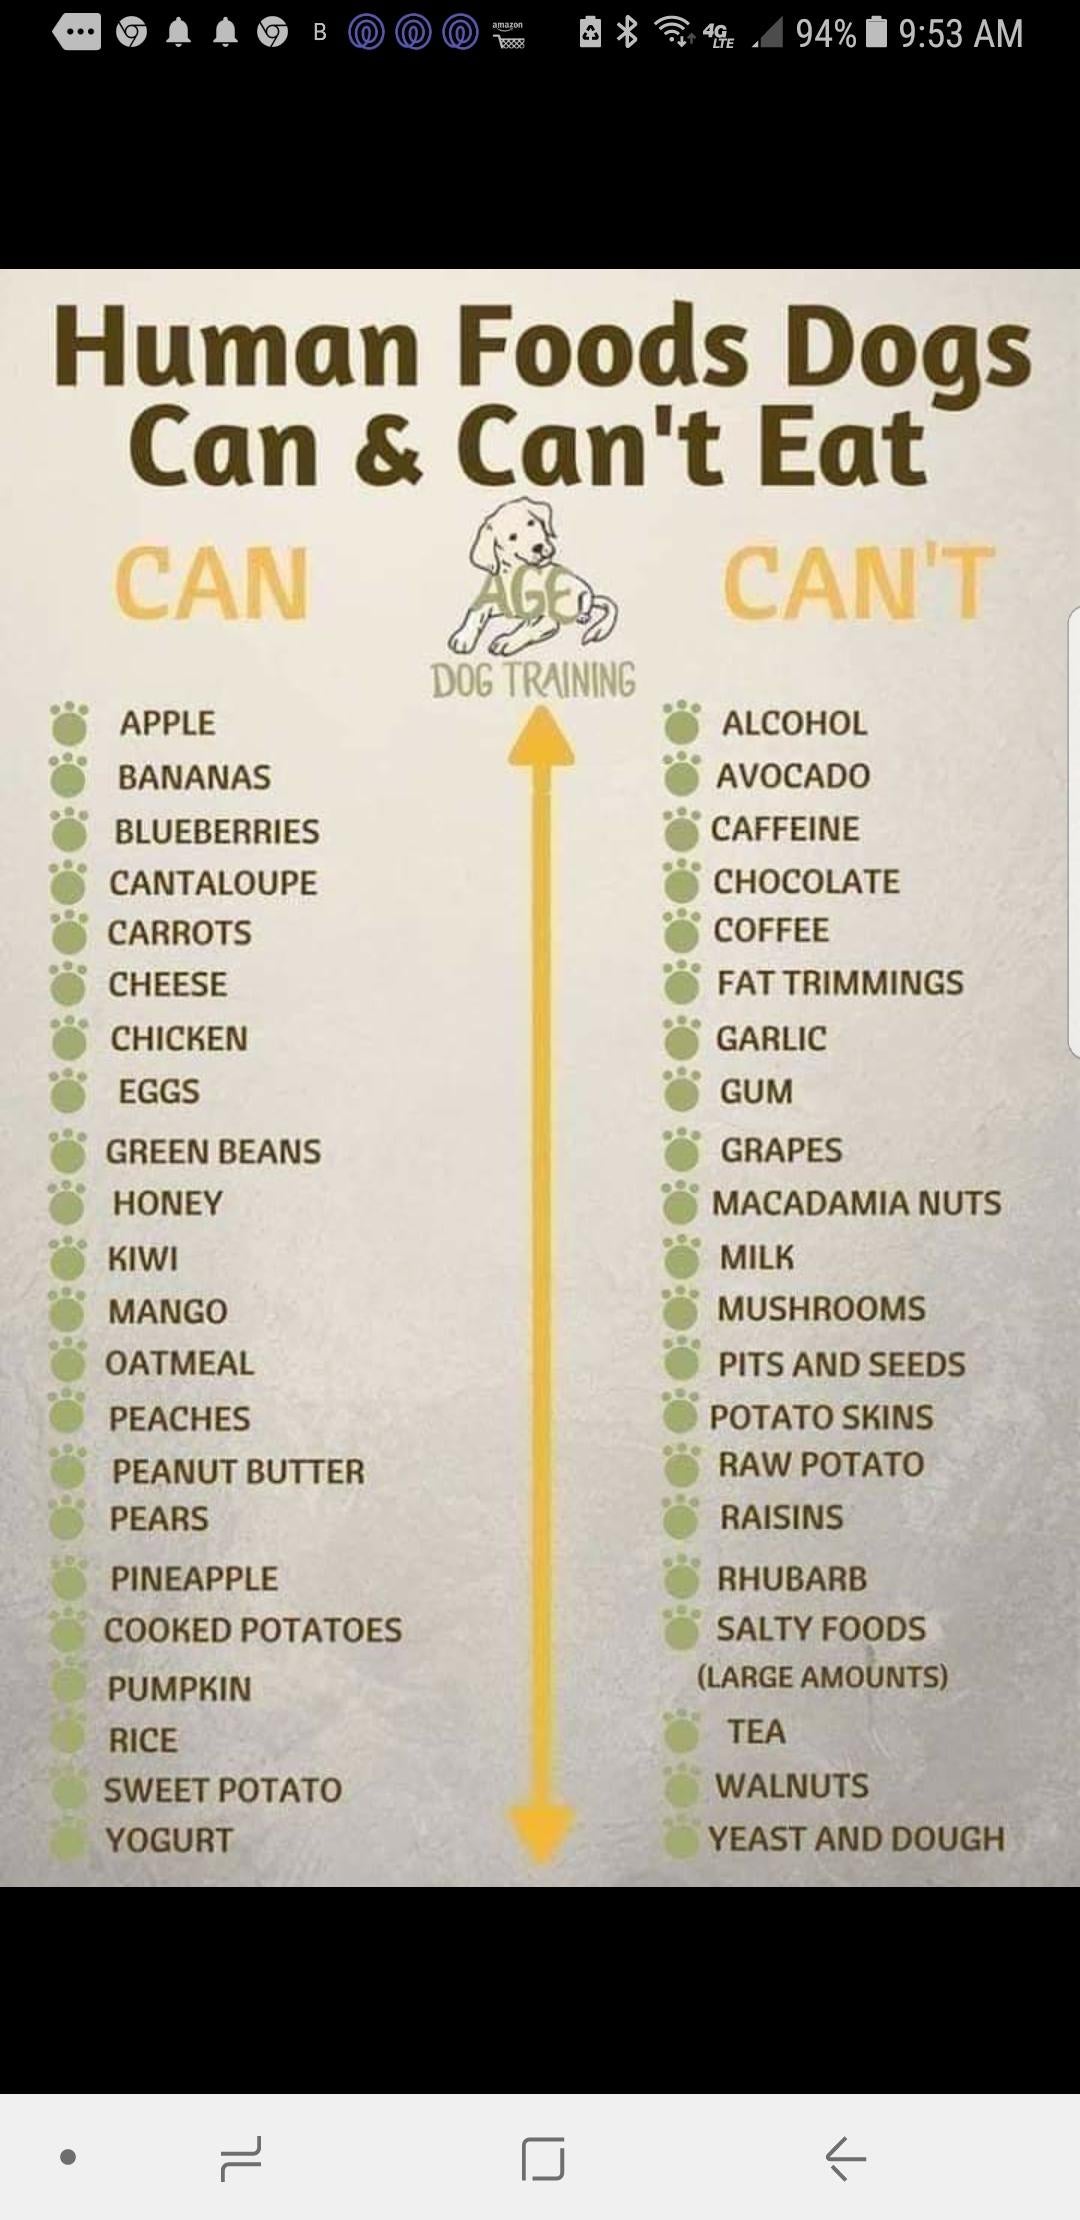 Human Foods Dogs Can & Can't Eat